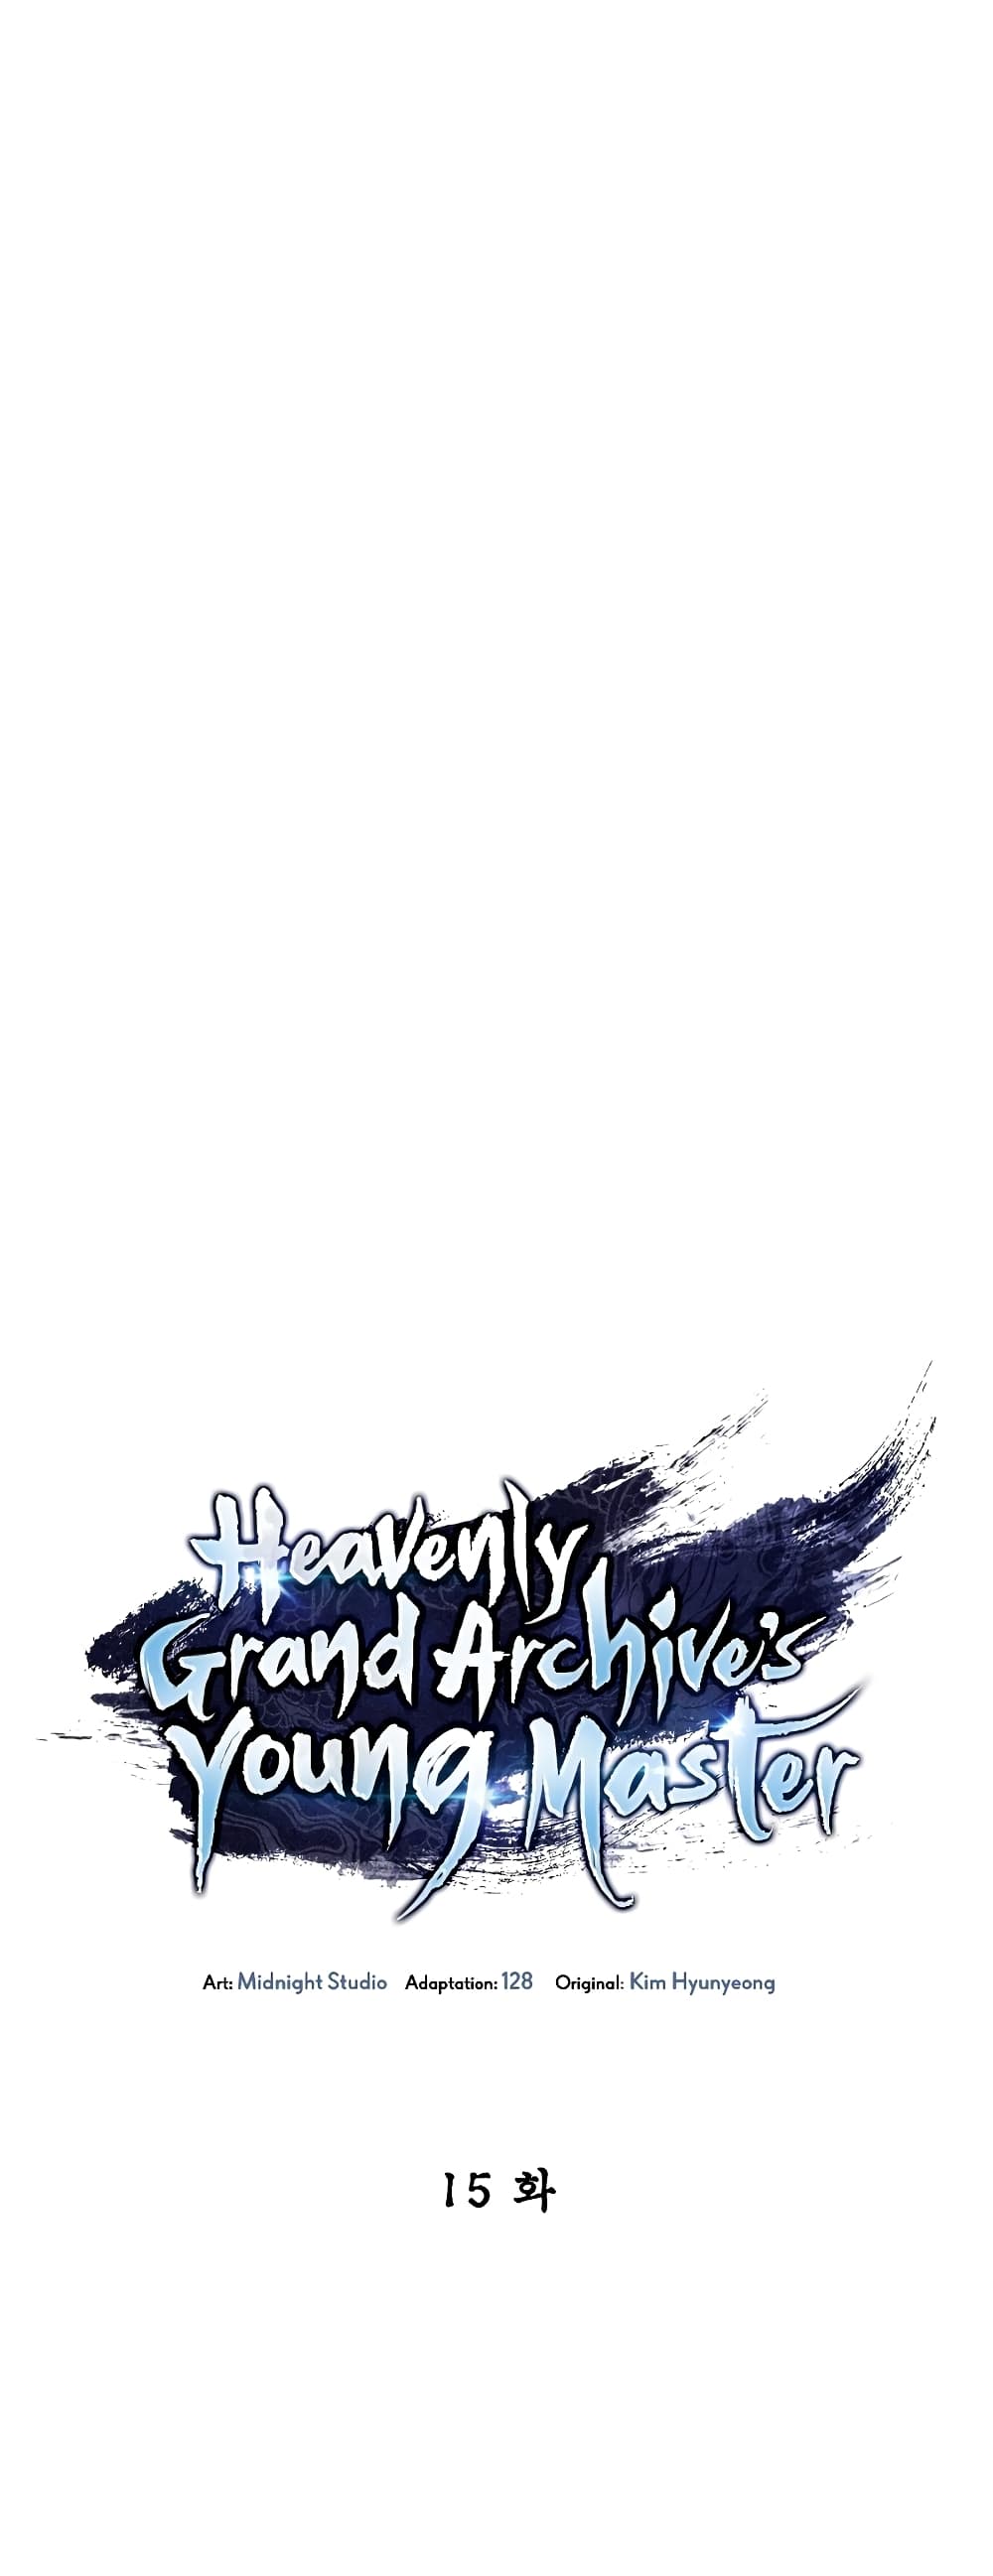 Heavenly Grand Archive’s Young Master 15-15